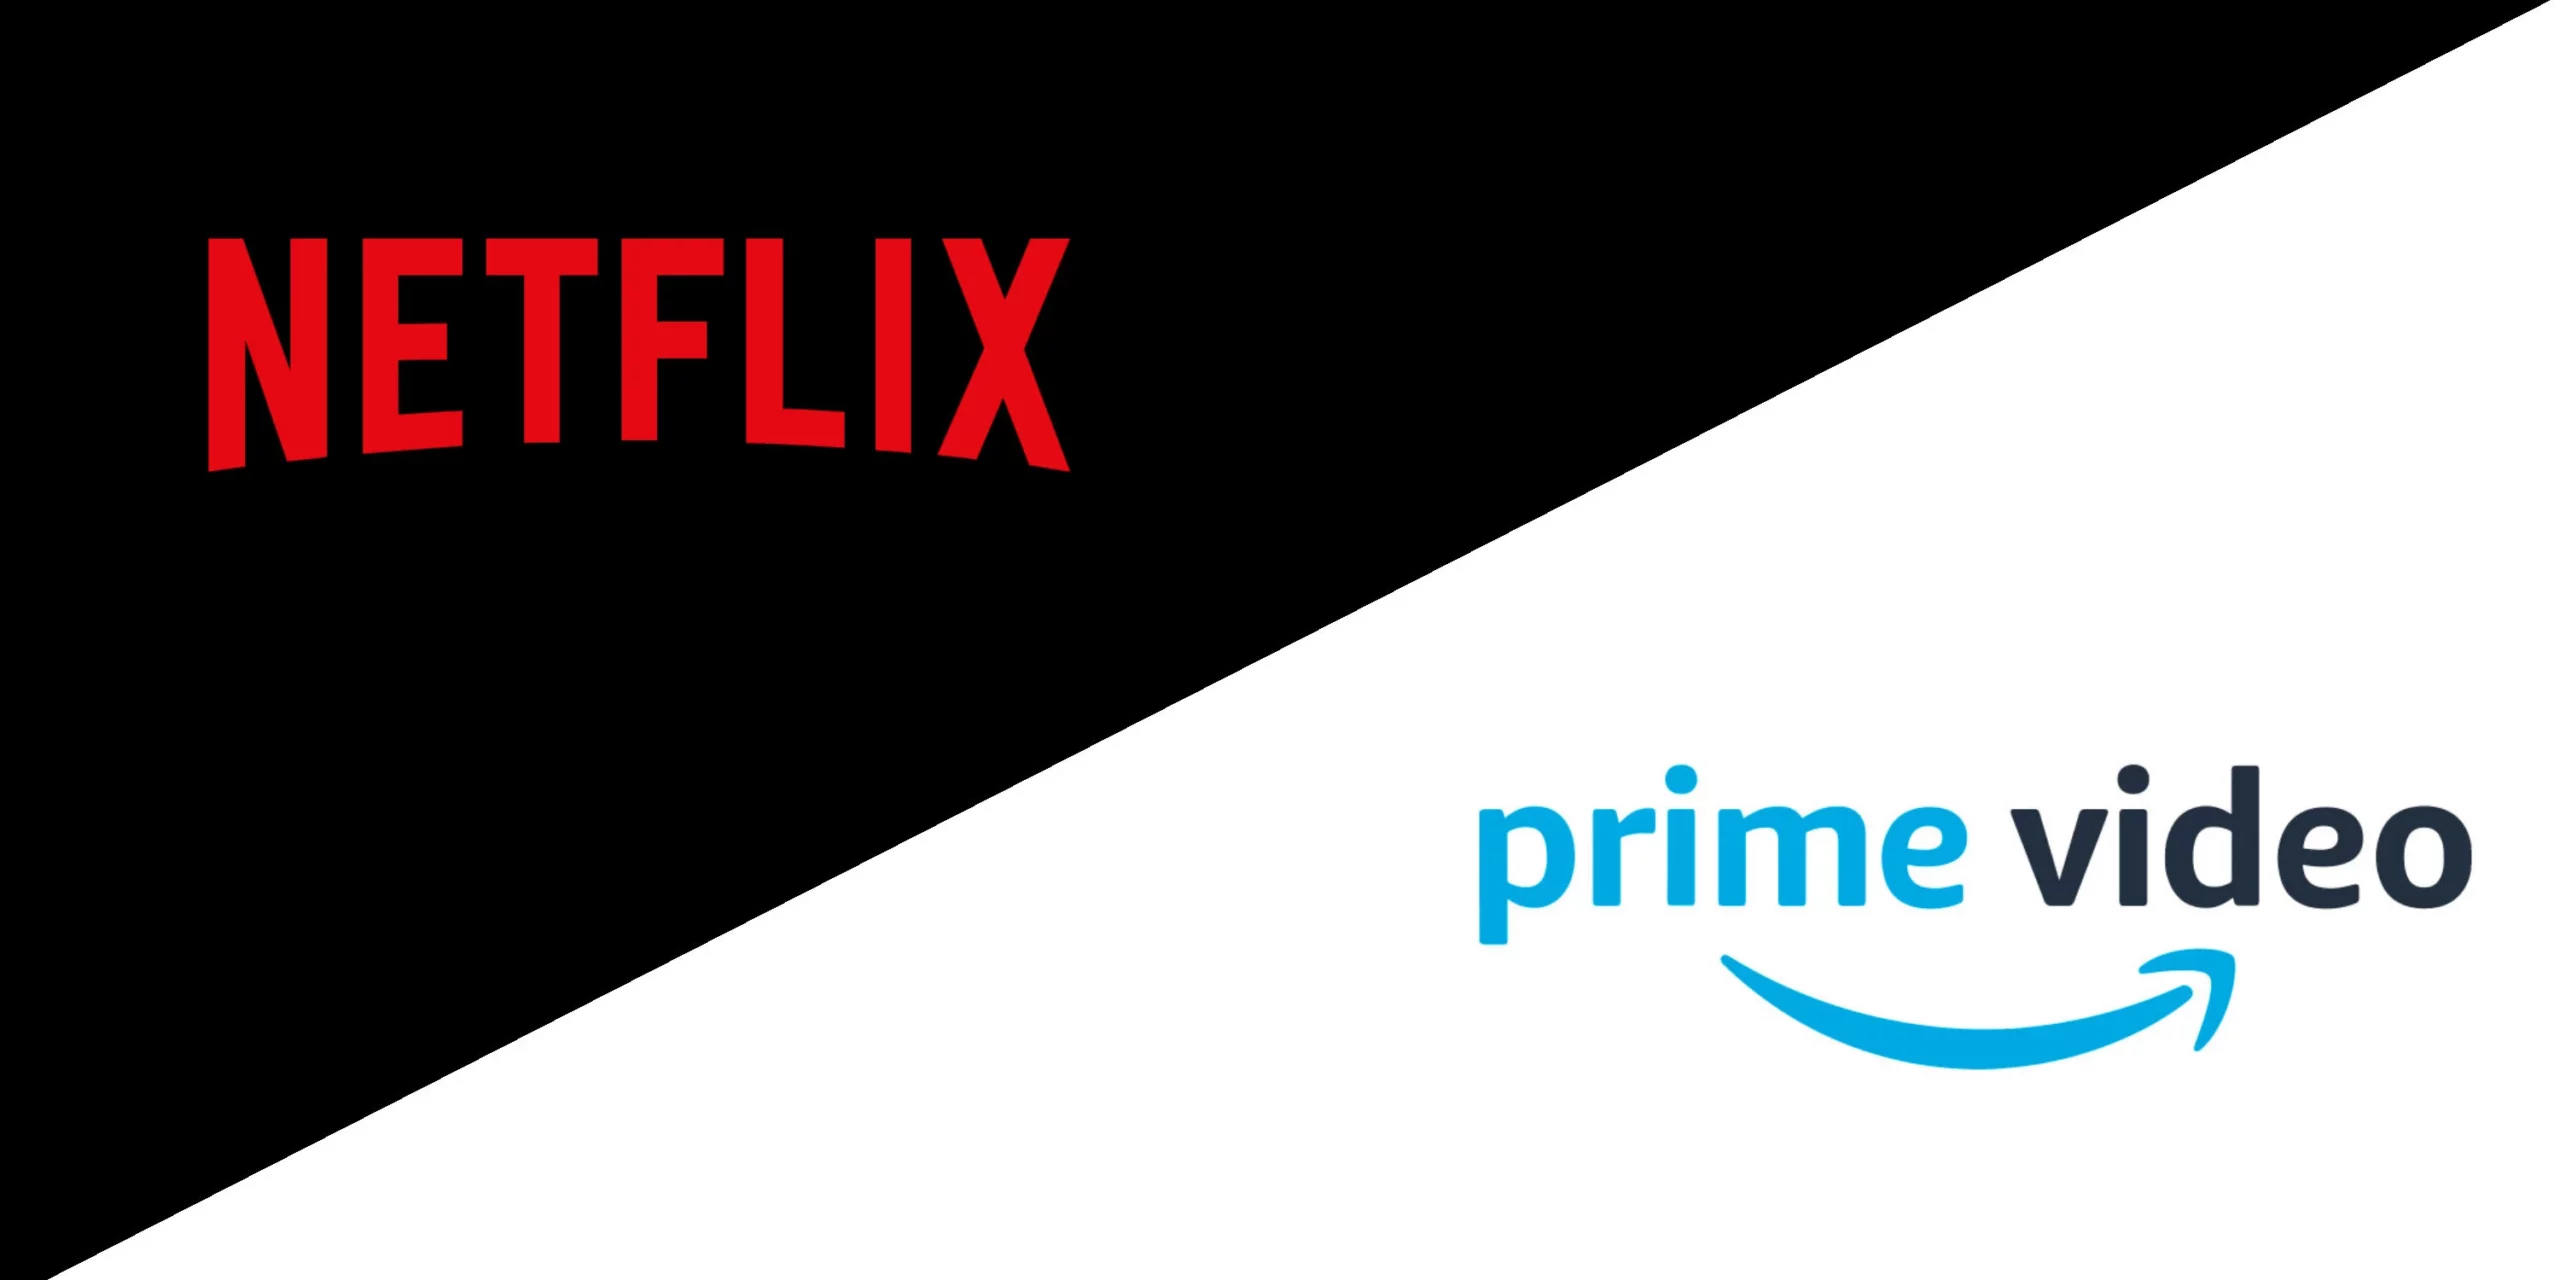 Netflix vs Prime Video: Netflix Shares Strong Opinion on Prime Video's Decision to Show Ads